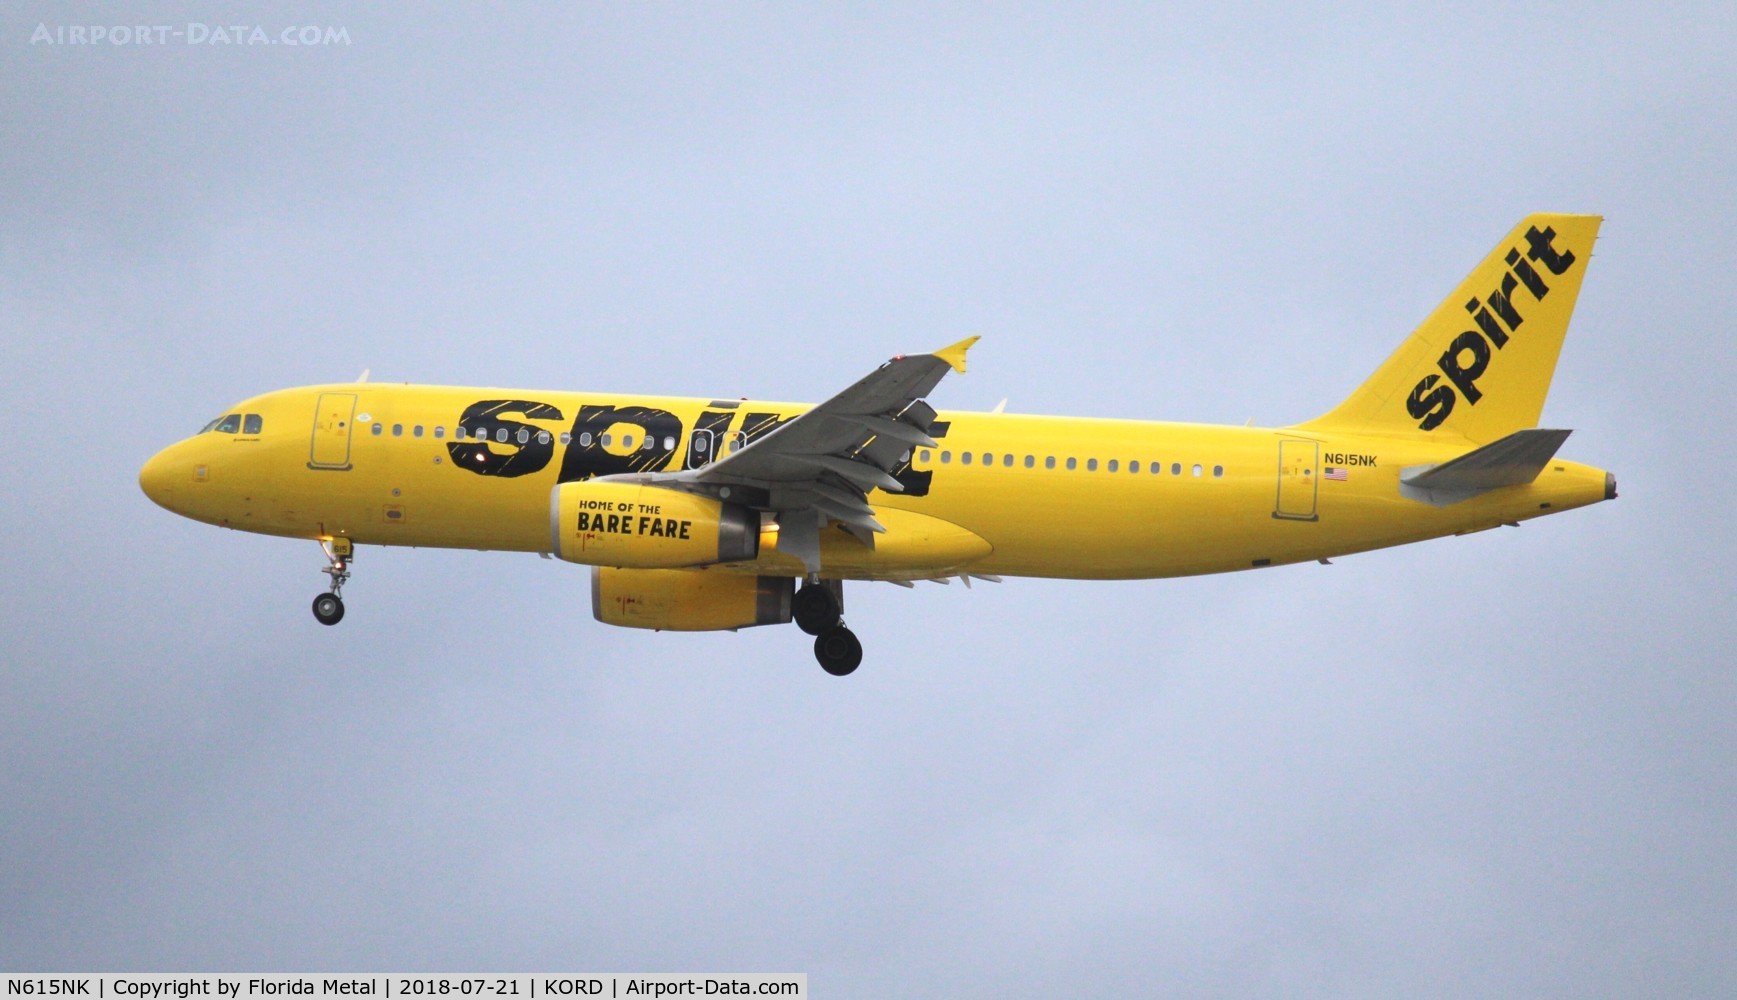 N615NK, 2012 Airbus A320-232 C/N 5159, NKS A320 yellow zx MCO-ORD